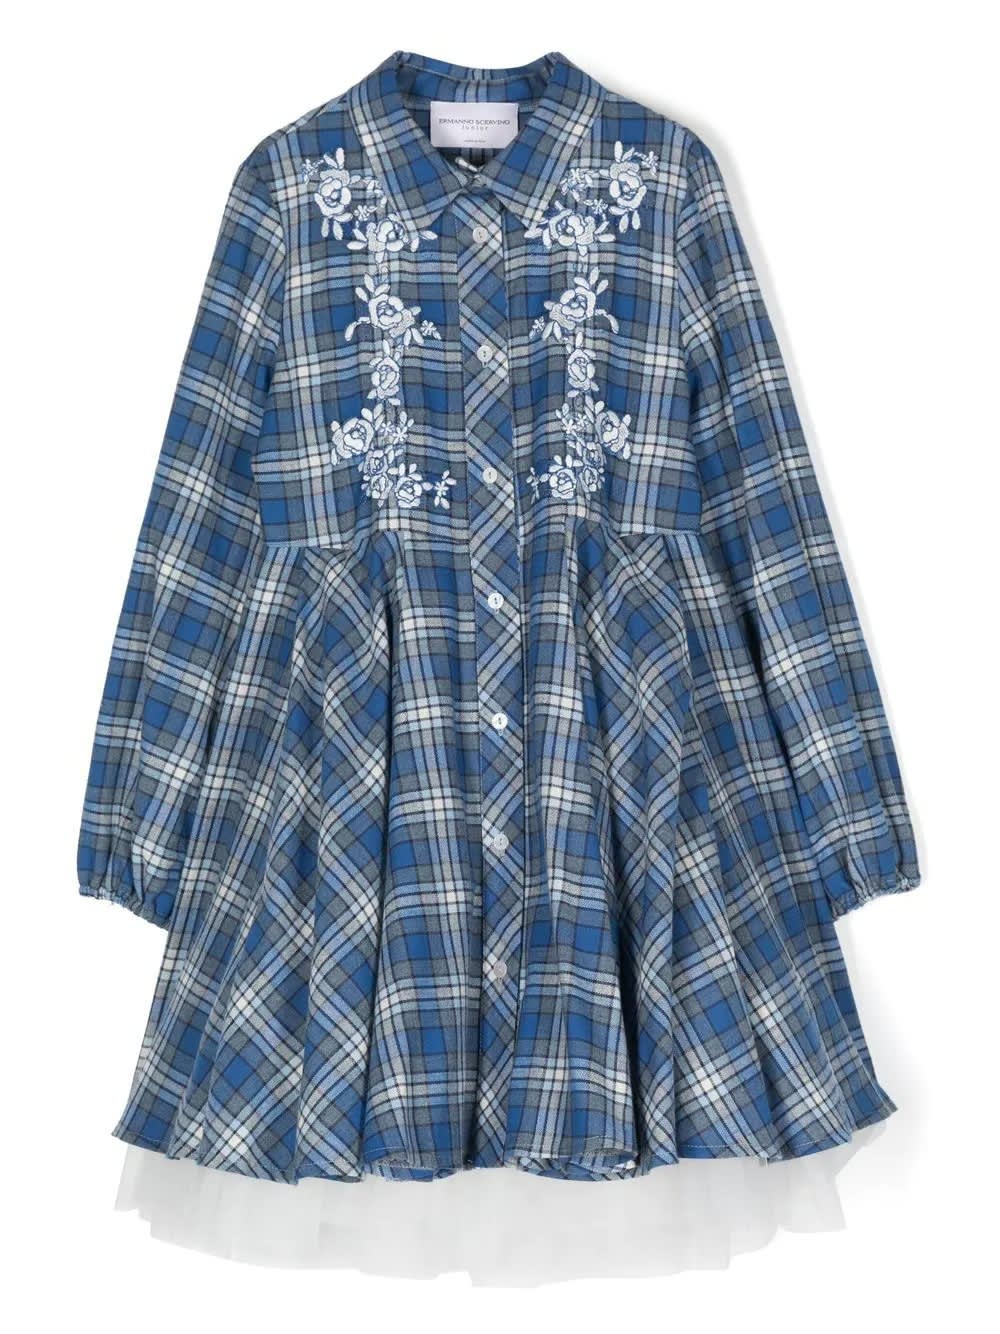 Ermanno Scervino Junior Kids Dress With Blue Check Pattern And White Floral Embroidery